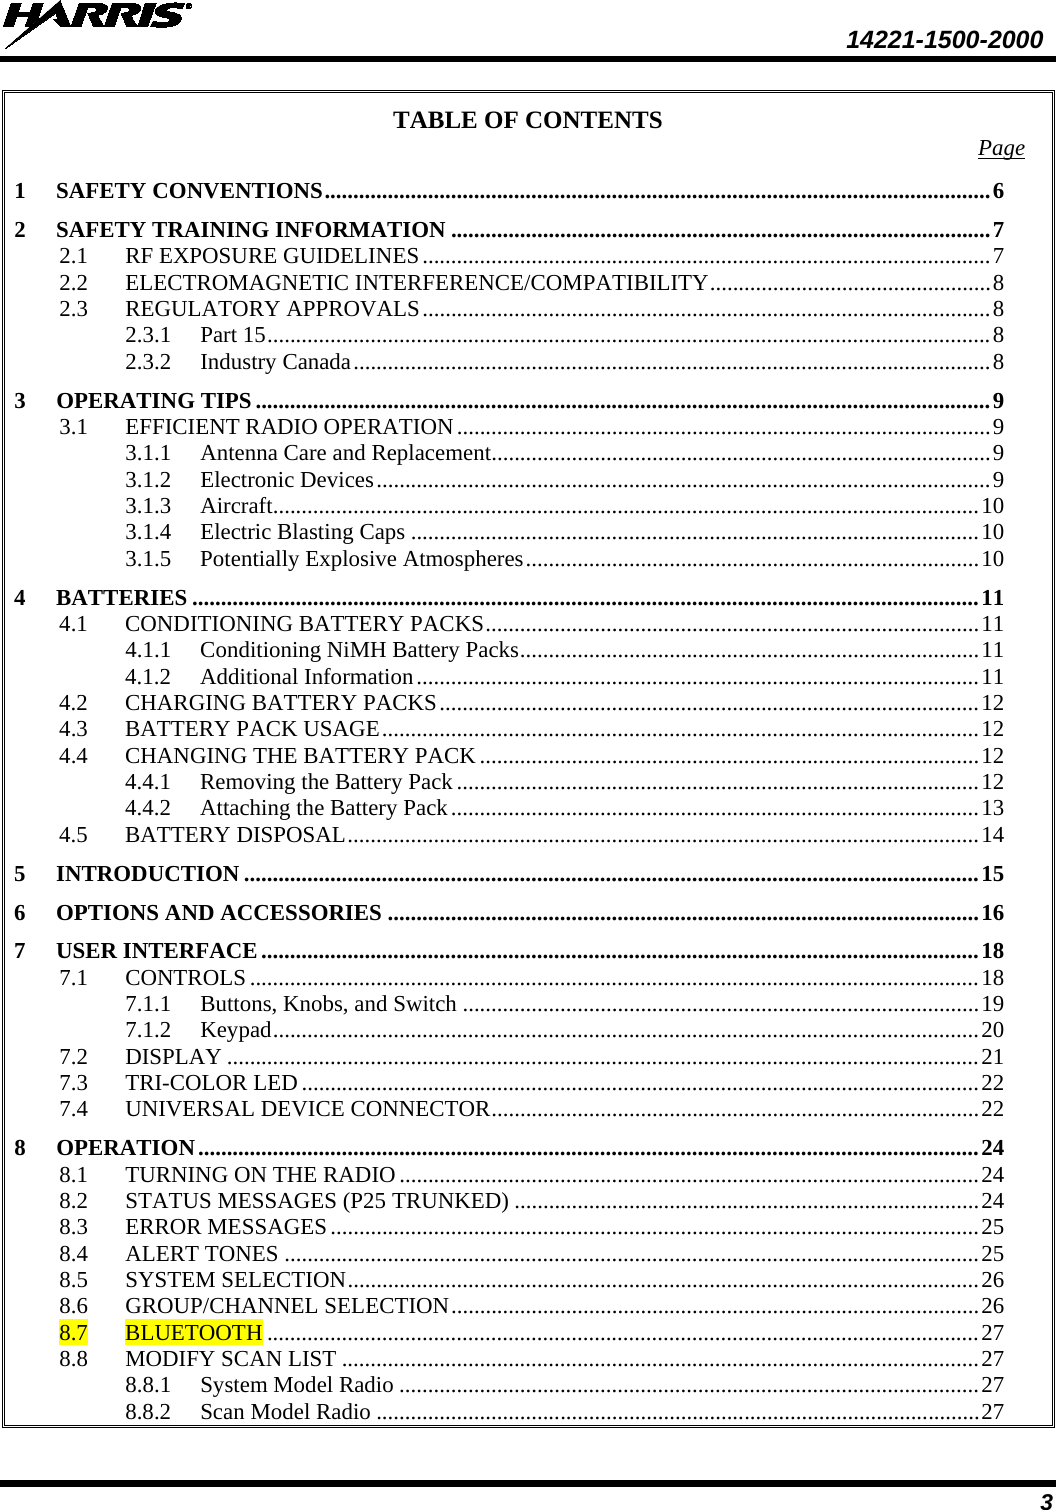  14221-1500-2000 3 TABLE OF CONTENTS Page 1 SAFETY CONVENTIONS .................................................................................................................... 6 2 SAFETY TRAINING INFORMATION .............................................................................................. 7 2.1 RF EXPOSURE GUIDELINES ................................................................................................... 7 2.2 ELECTROMAGNETIC INTERFERENCE/COMPATIBILITY ................................................. 8 2.3 REGULATORY APPROVALS ................................................................................................... 8 2.3.1 Part 15 .............................................................................................................................. 8 2.3.2 Industry Canada ............................................................................................................... 8 3 OPERATING TIPS ................................................................................................................................ 9 3.1 EFFICIENT RADIO OPERATION ............................................................................................. 9 3.1.1 Antenna Care and Replacement ....................................................................................... 9 3.1.2 Electronic Devices ........................................................................................................... 9 3.1.3 Aircraft........................................................................................................................... 10 3.1.4 Electric Blasting Caps ................................................................................................... 10 3.1.5 Potentially Explosive Atmospheres ............................................................................... 10 4 BATTERIES ......................................................................................................................................... 11 4.1 CONDITIONING BATTERY PACKS ...................................................................................... 11 4.1.1 Conditioning NiMH Battery Packs ................................................................................ 11 4.1.2 Additional Information .................................................................................................. 11 4.2 CHARGING BATTERY PACKS .............................................................................................. 12 4.3 BATTERY PACK USAGE ........................................................................................................ 12 4.4 CHANGING THE BATTERY PACK ....................................................................................... 12 4.4.1 Removing the Battery Pack ........................................................................................... 12 4.4.2 Attaching the Battery Pack ............................................................................................ 13 4.5 BATTERY DISPOSAL .............................................................................................................. 14 5 INTRODUCTION ................................................................................................................................ 15 6 OPTIONS AND ACCESSORIES ....................................................................................................... 16 7 USER INTERFACE ............................................................................................................................. 18 7.1 CONTROLS ............................................................................................................................... 18 7.1.1 Buttons, Knobs, and Switch .......................................................................................... 19 7.1.2 Keypad ........................................................................................................................... 20 7.2 DISPLAY ................................................................................................................................... 21 7.3 TRI-COLOR LED ...................................................................................................................... 22 7.4 UNIVERSAL DEVICE CONNECTOR ..................................................................................... 22 8 OPERATION ........................................................................................................................................ 24 8.1 TURNING ON THE RADIO ..................................................................................................... 24 8.2 STATUS MESSAGES (P25 TRUNKED) ................................................................................. 24 8.3 ERROR MESSAGES ................................................................................................................. 25 8.4 ALERT TONES ......................................................................................................................... 25 8.5 SYSTEM SELECTION .............................................................................................................. 26 8.6 GROUP/CHANNEL SELECTION ............................................................................................ 26 8.7 BLUETOOTH ............................................................................................................................ 27 8.8 MODIFY SCAN LIST ............................................................................................................... 27 8.8.1 System Model Radio ..................................................................................................... 27 8.8.2 Scan Model Radio ......................................................................................................... 27 